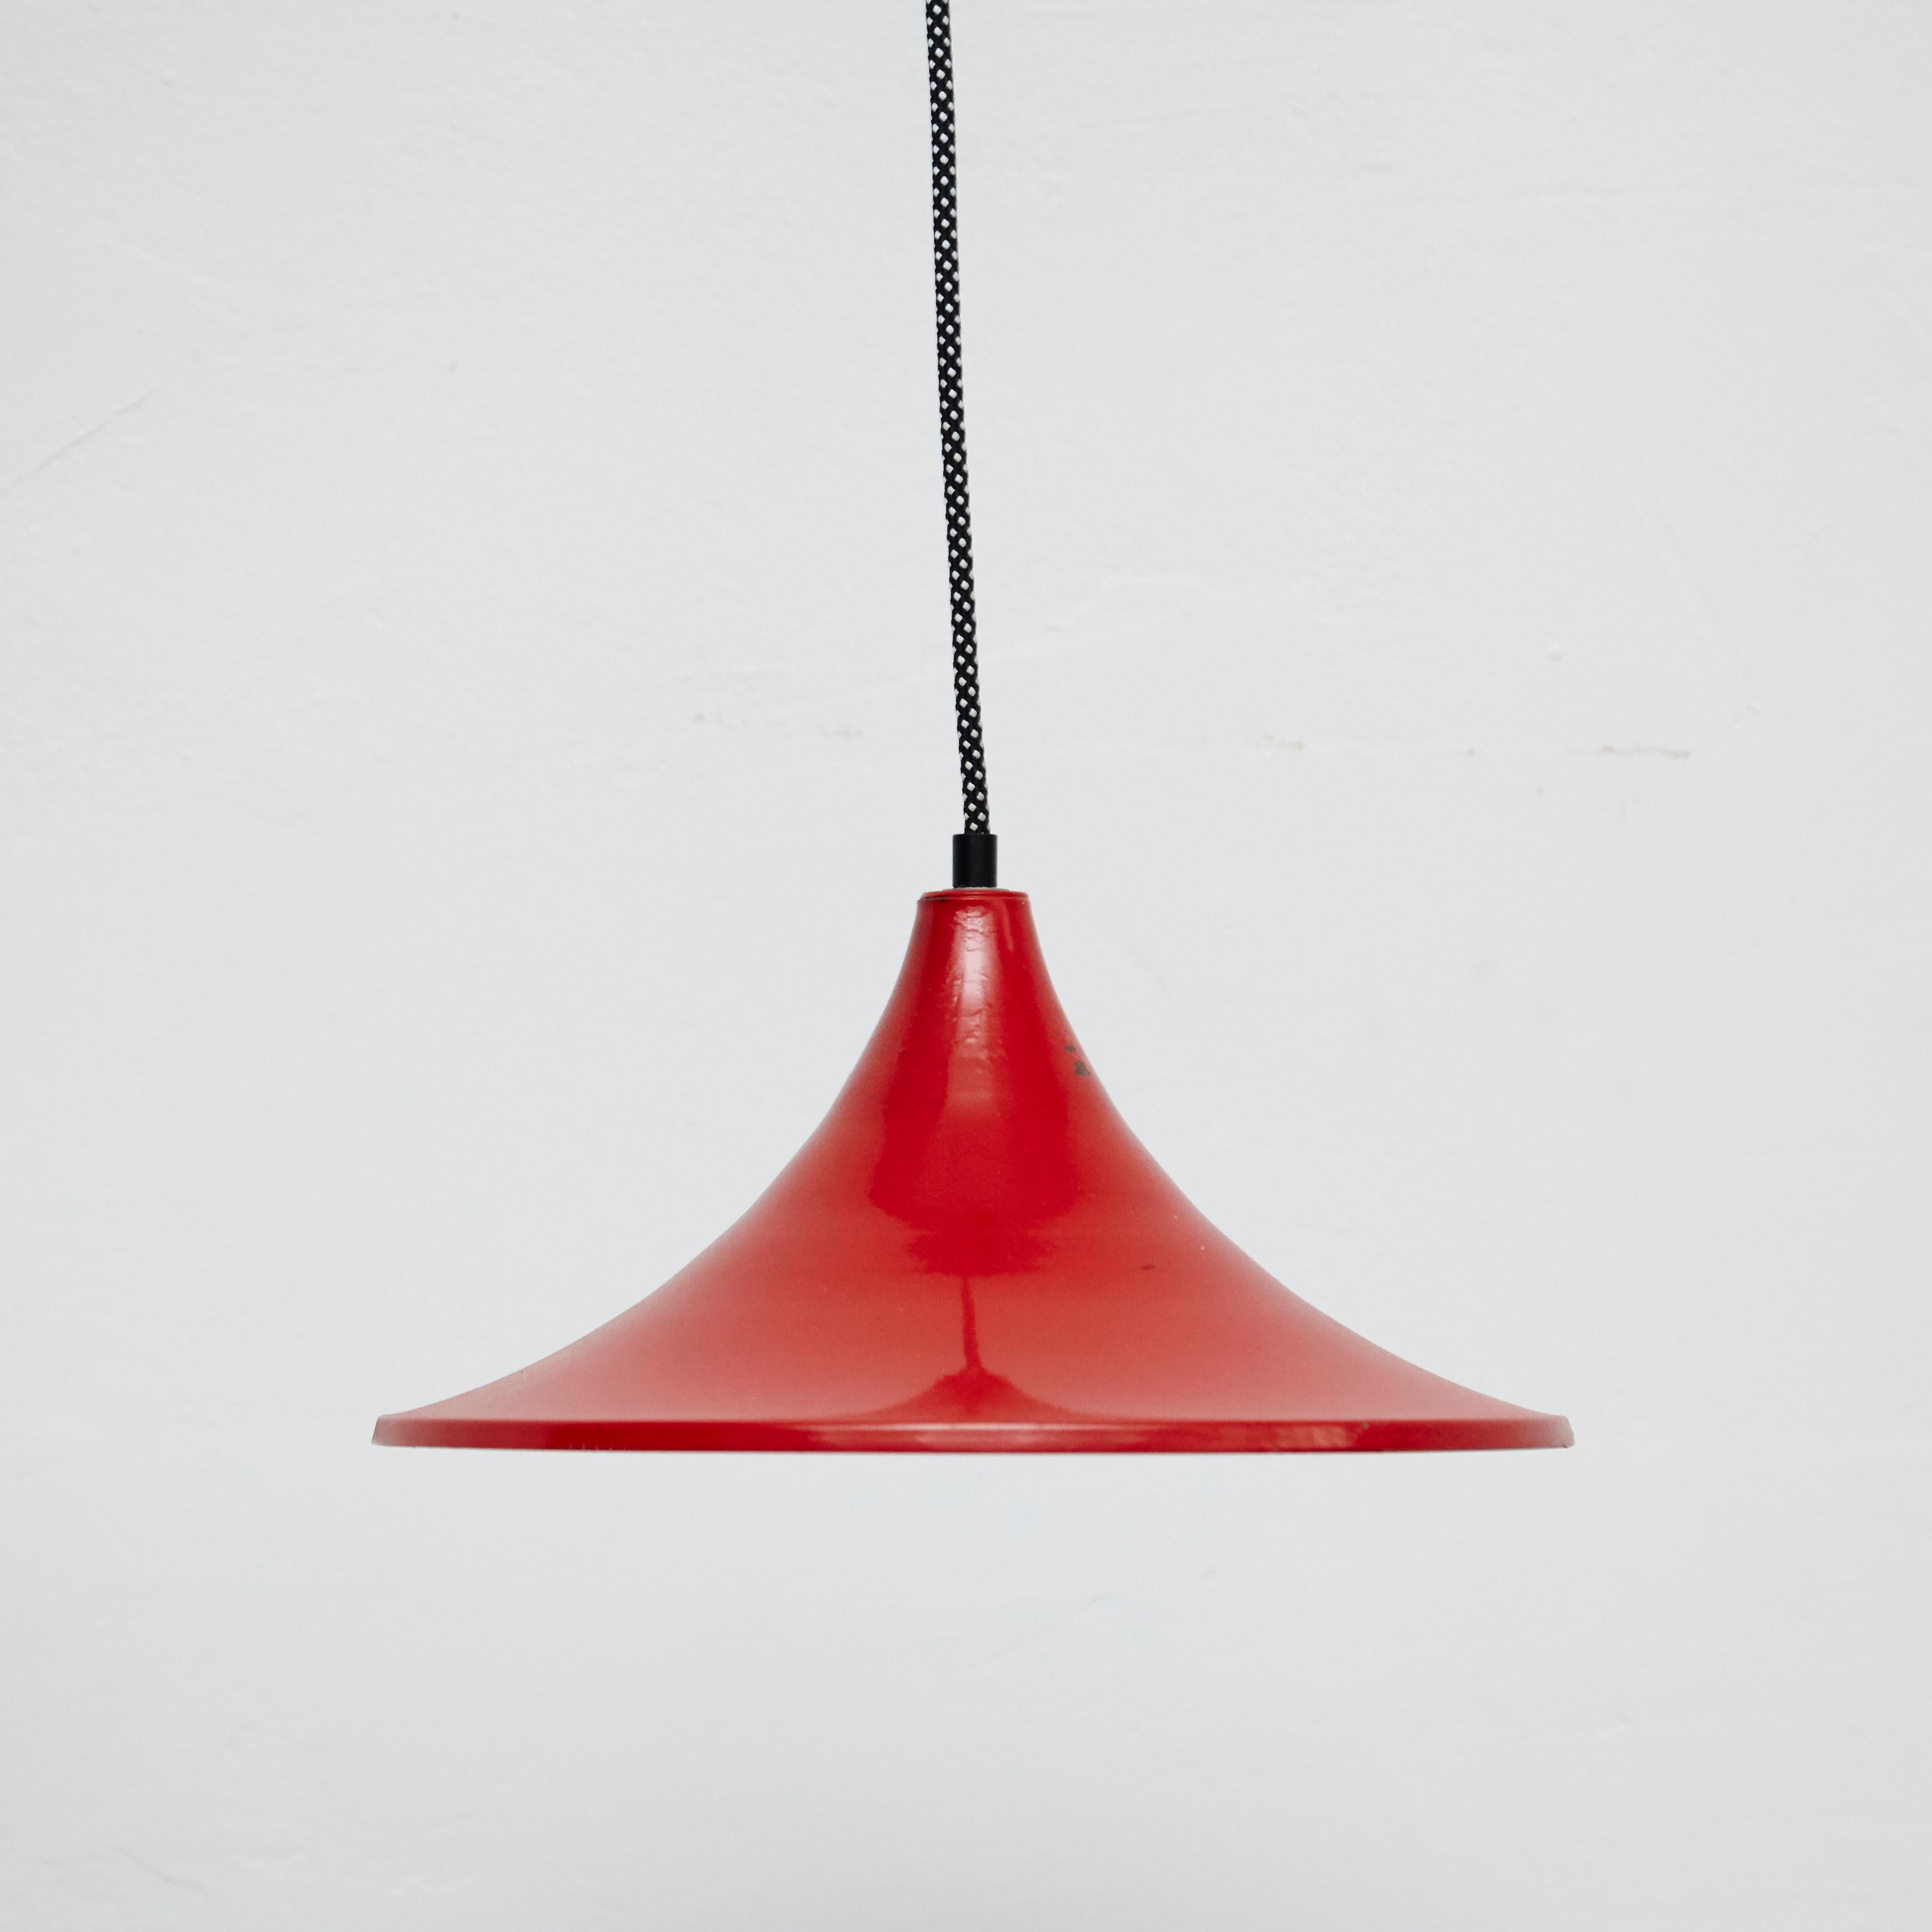 Early 20th century antique red brass ceiling lamp.
By unknown manufacturer, France.
In original condition, with minor wear consistent with age and use, preserving a beautiful patina.

Materials:
Lacquered metal

Dimensions:
ø 32 cm x H 15 cm.